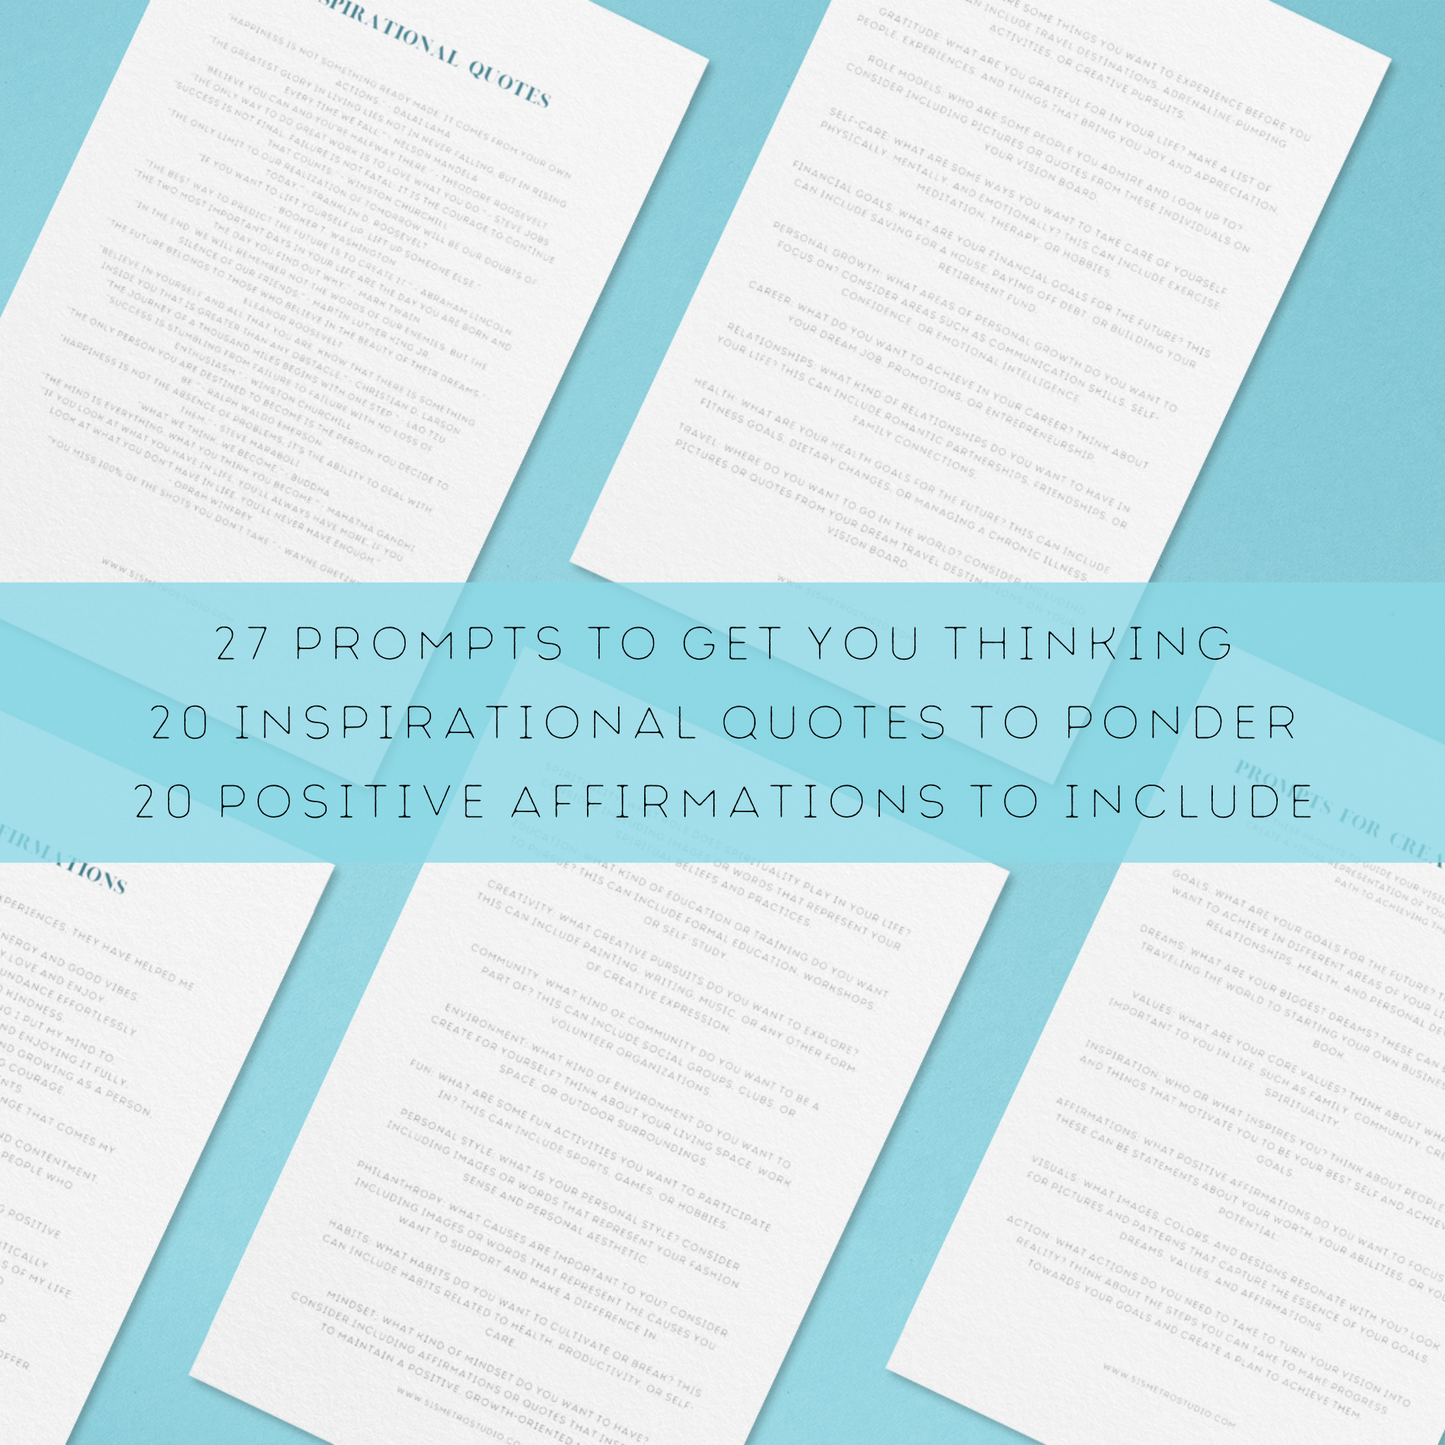 Inspirational Vision Board Prompts | Inspirational Quotes and Positive Affirmations | Printable Instant Download